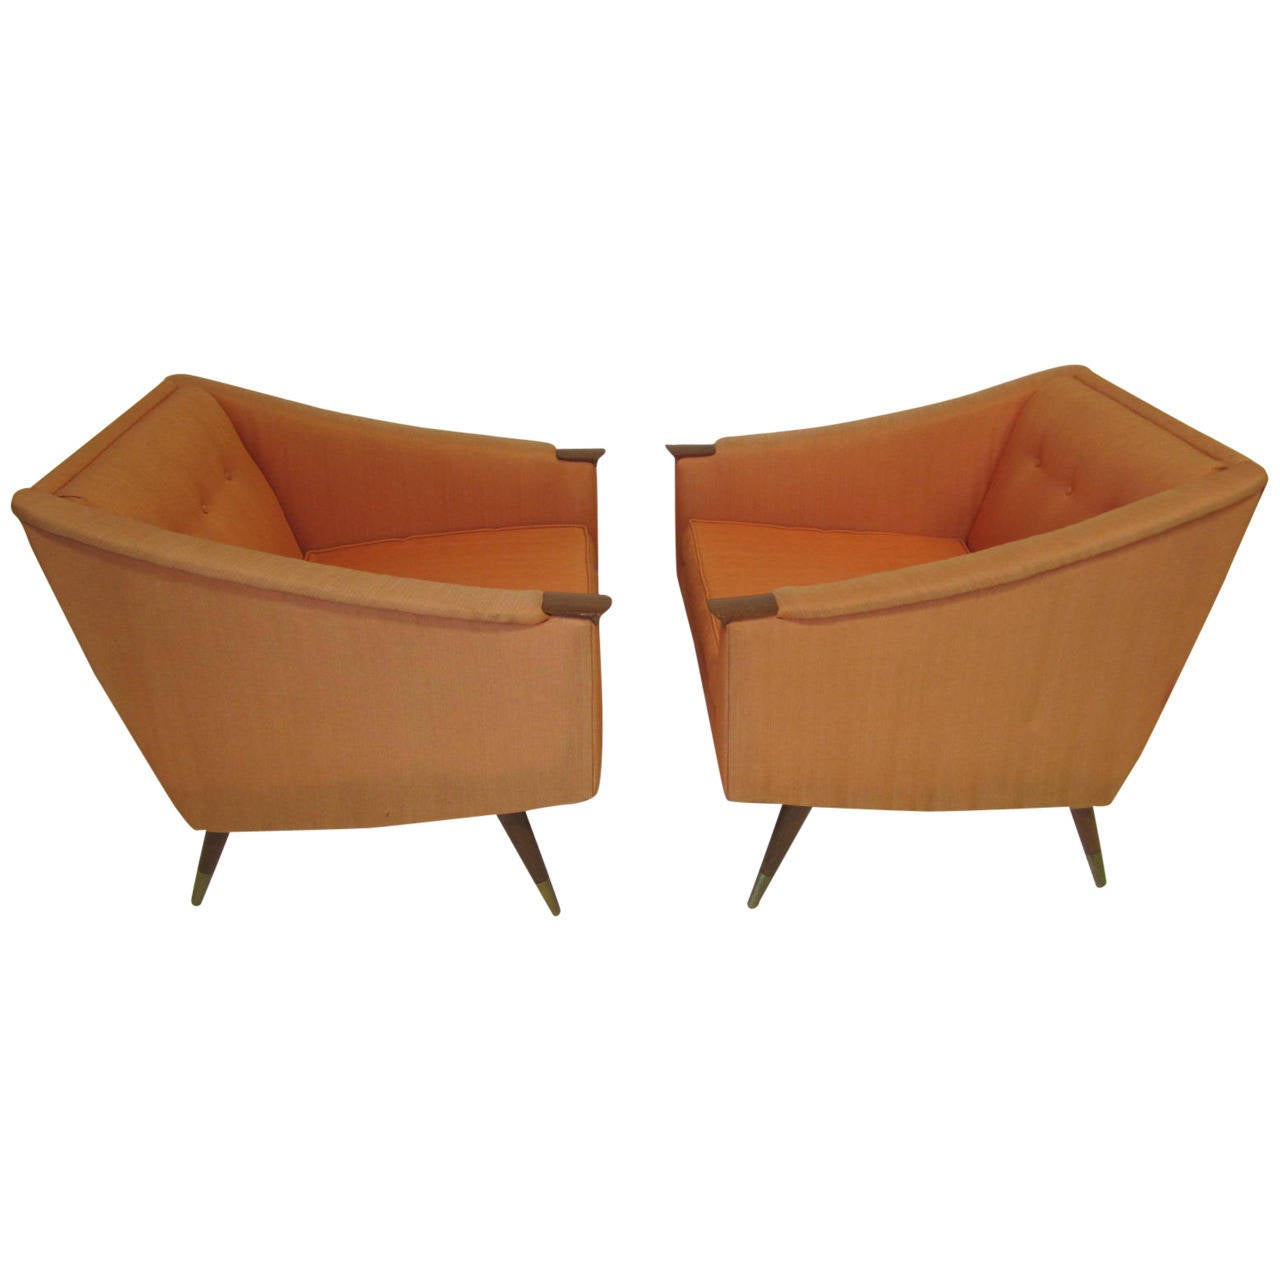 Unusual Pair of Signed Karpen Boxy Lounge Chairs, Mid-Century Modern